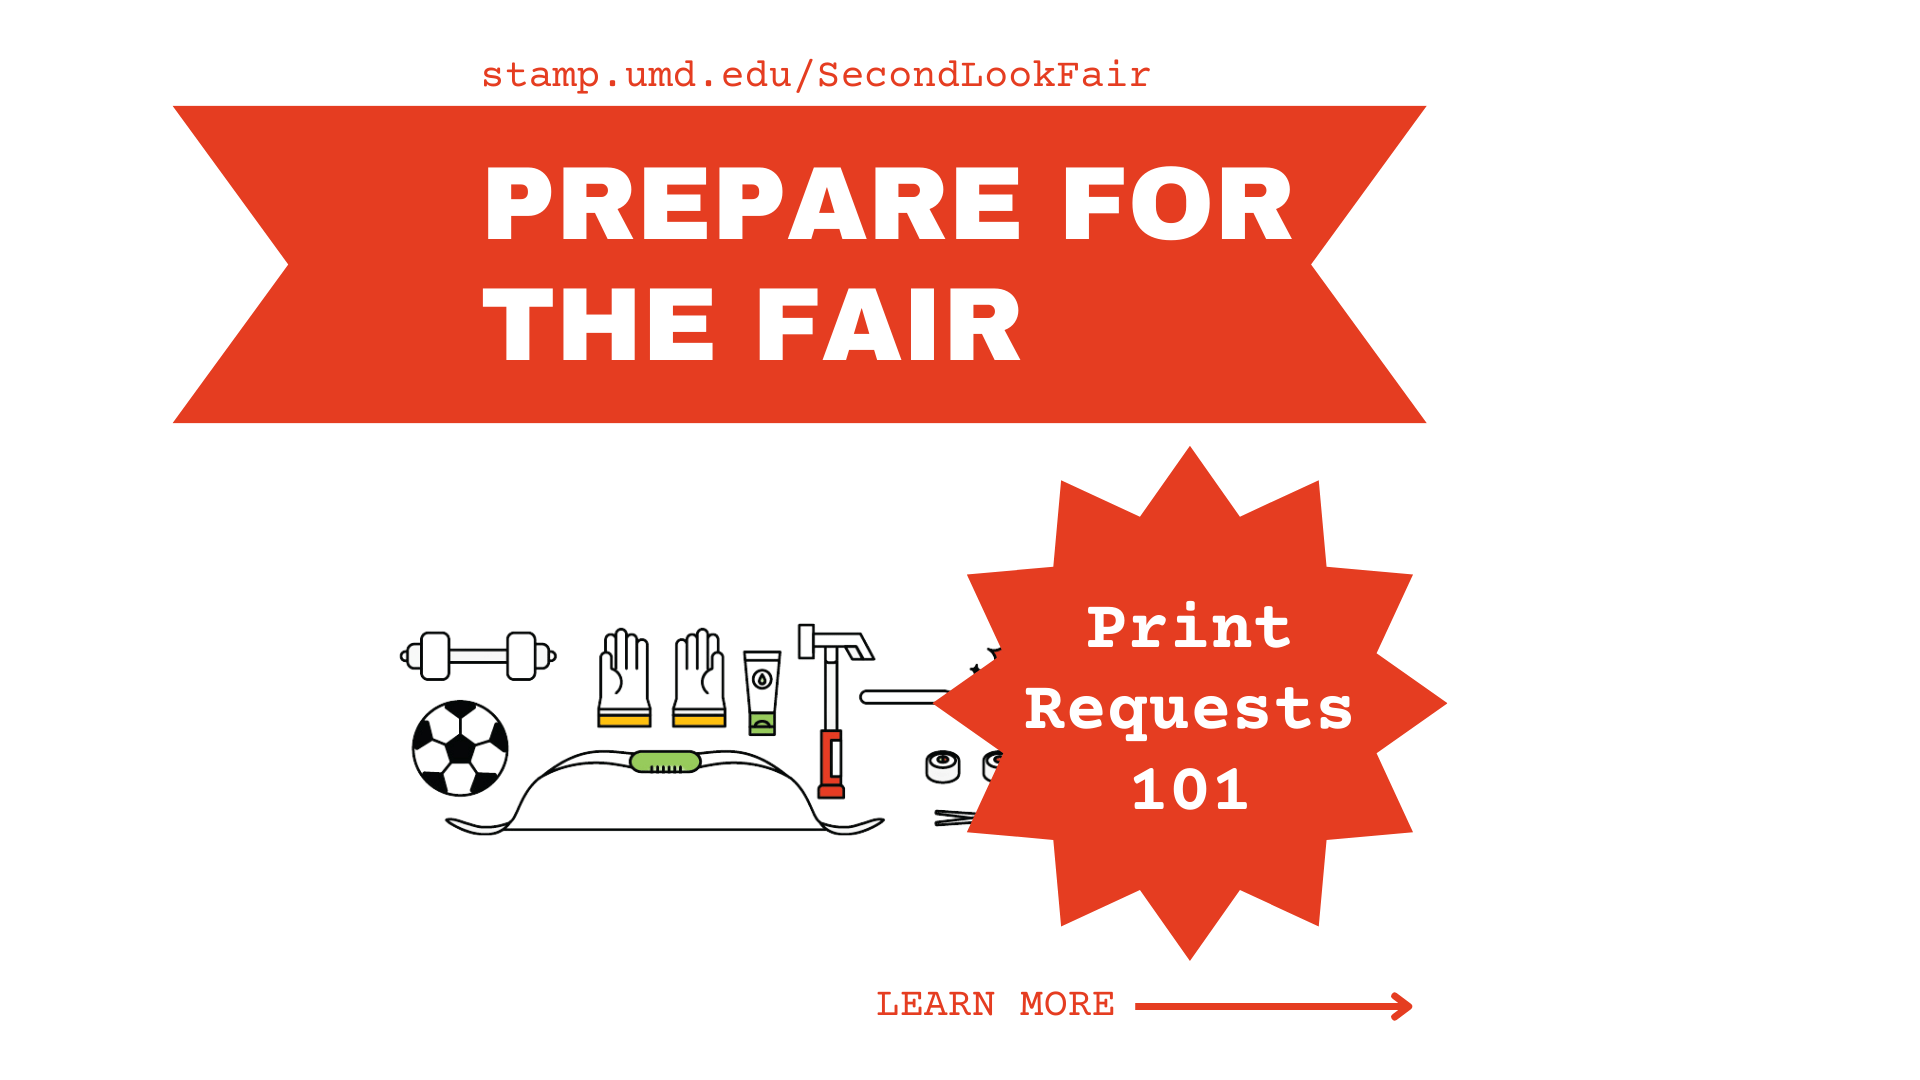 Prepare for the Fair - Print Requests